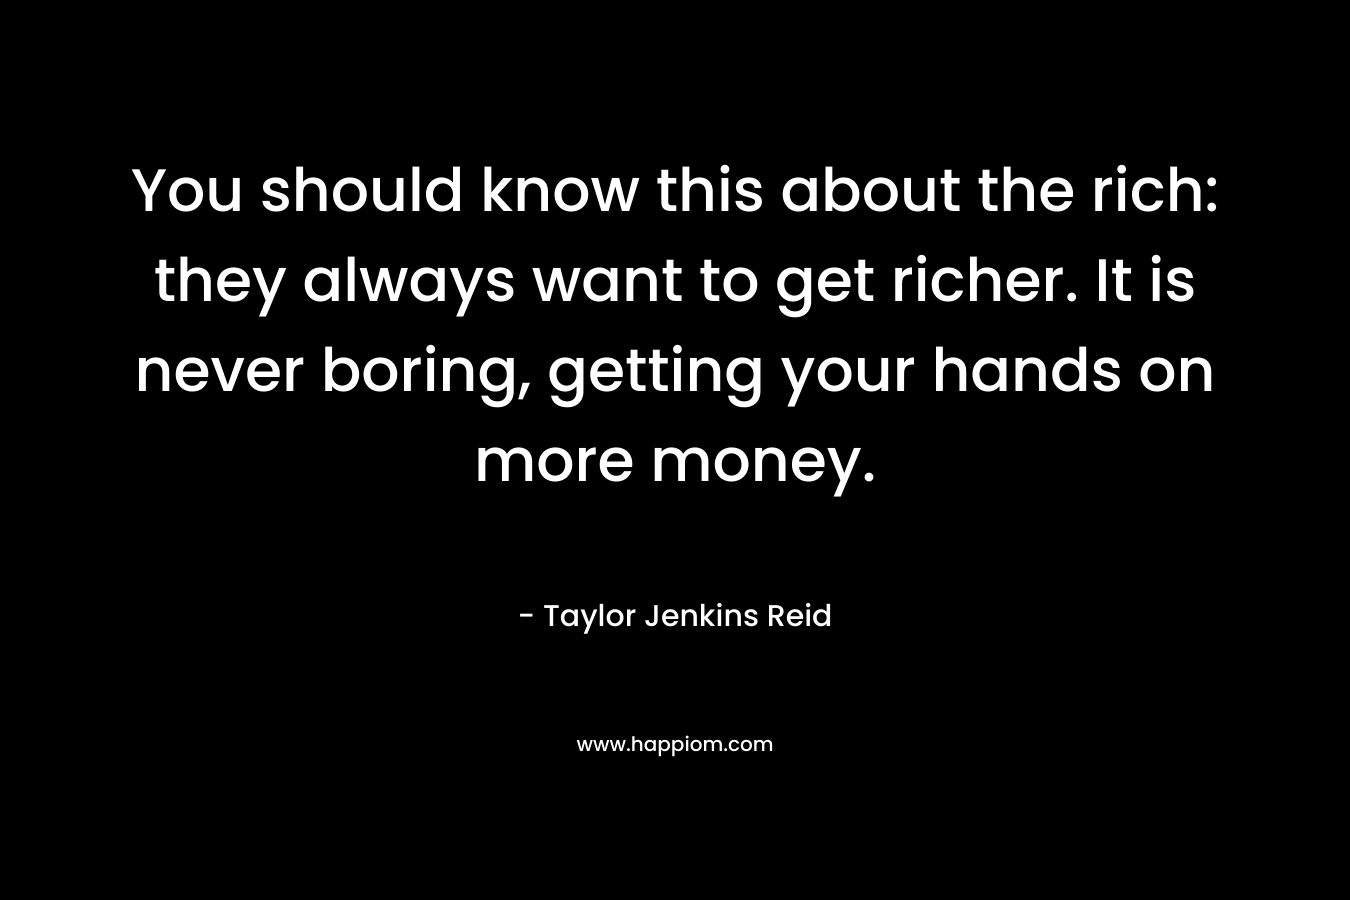 You should know this about the rich: they always want to get richer. It is never boring, getting your hands on more money. – Taylor Jenkins Reid